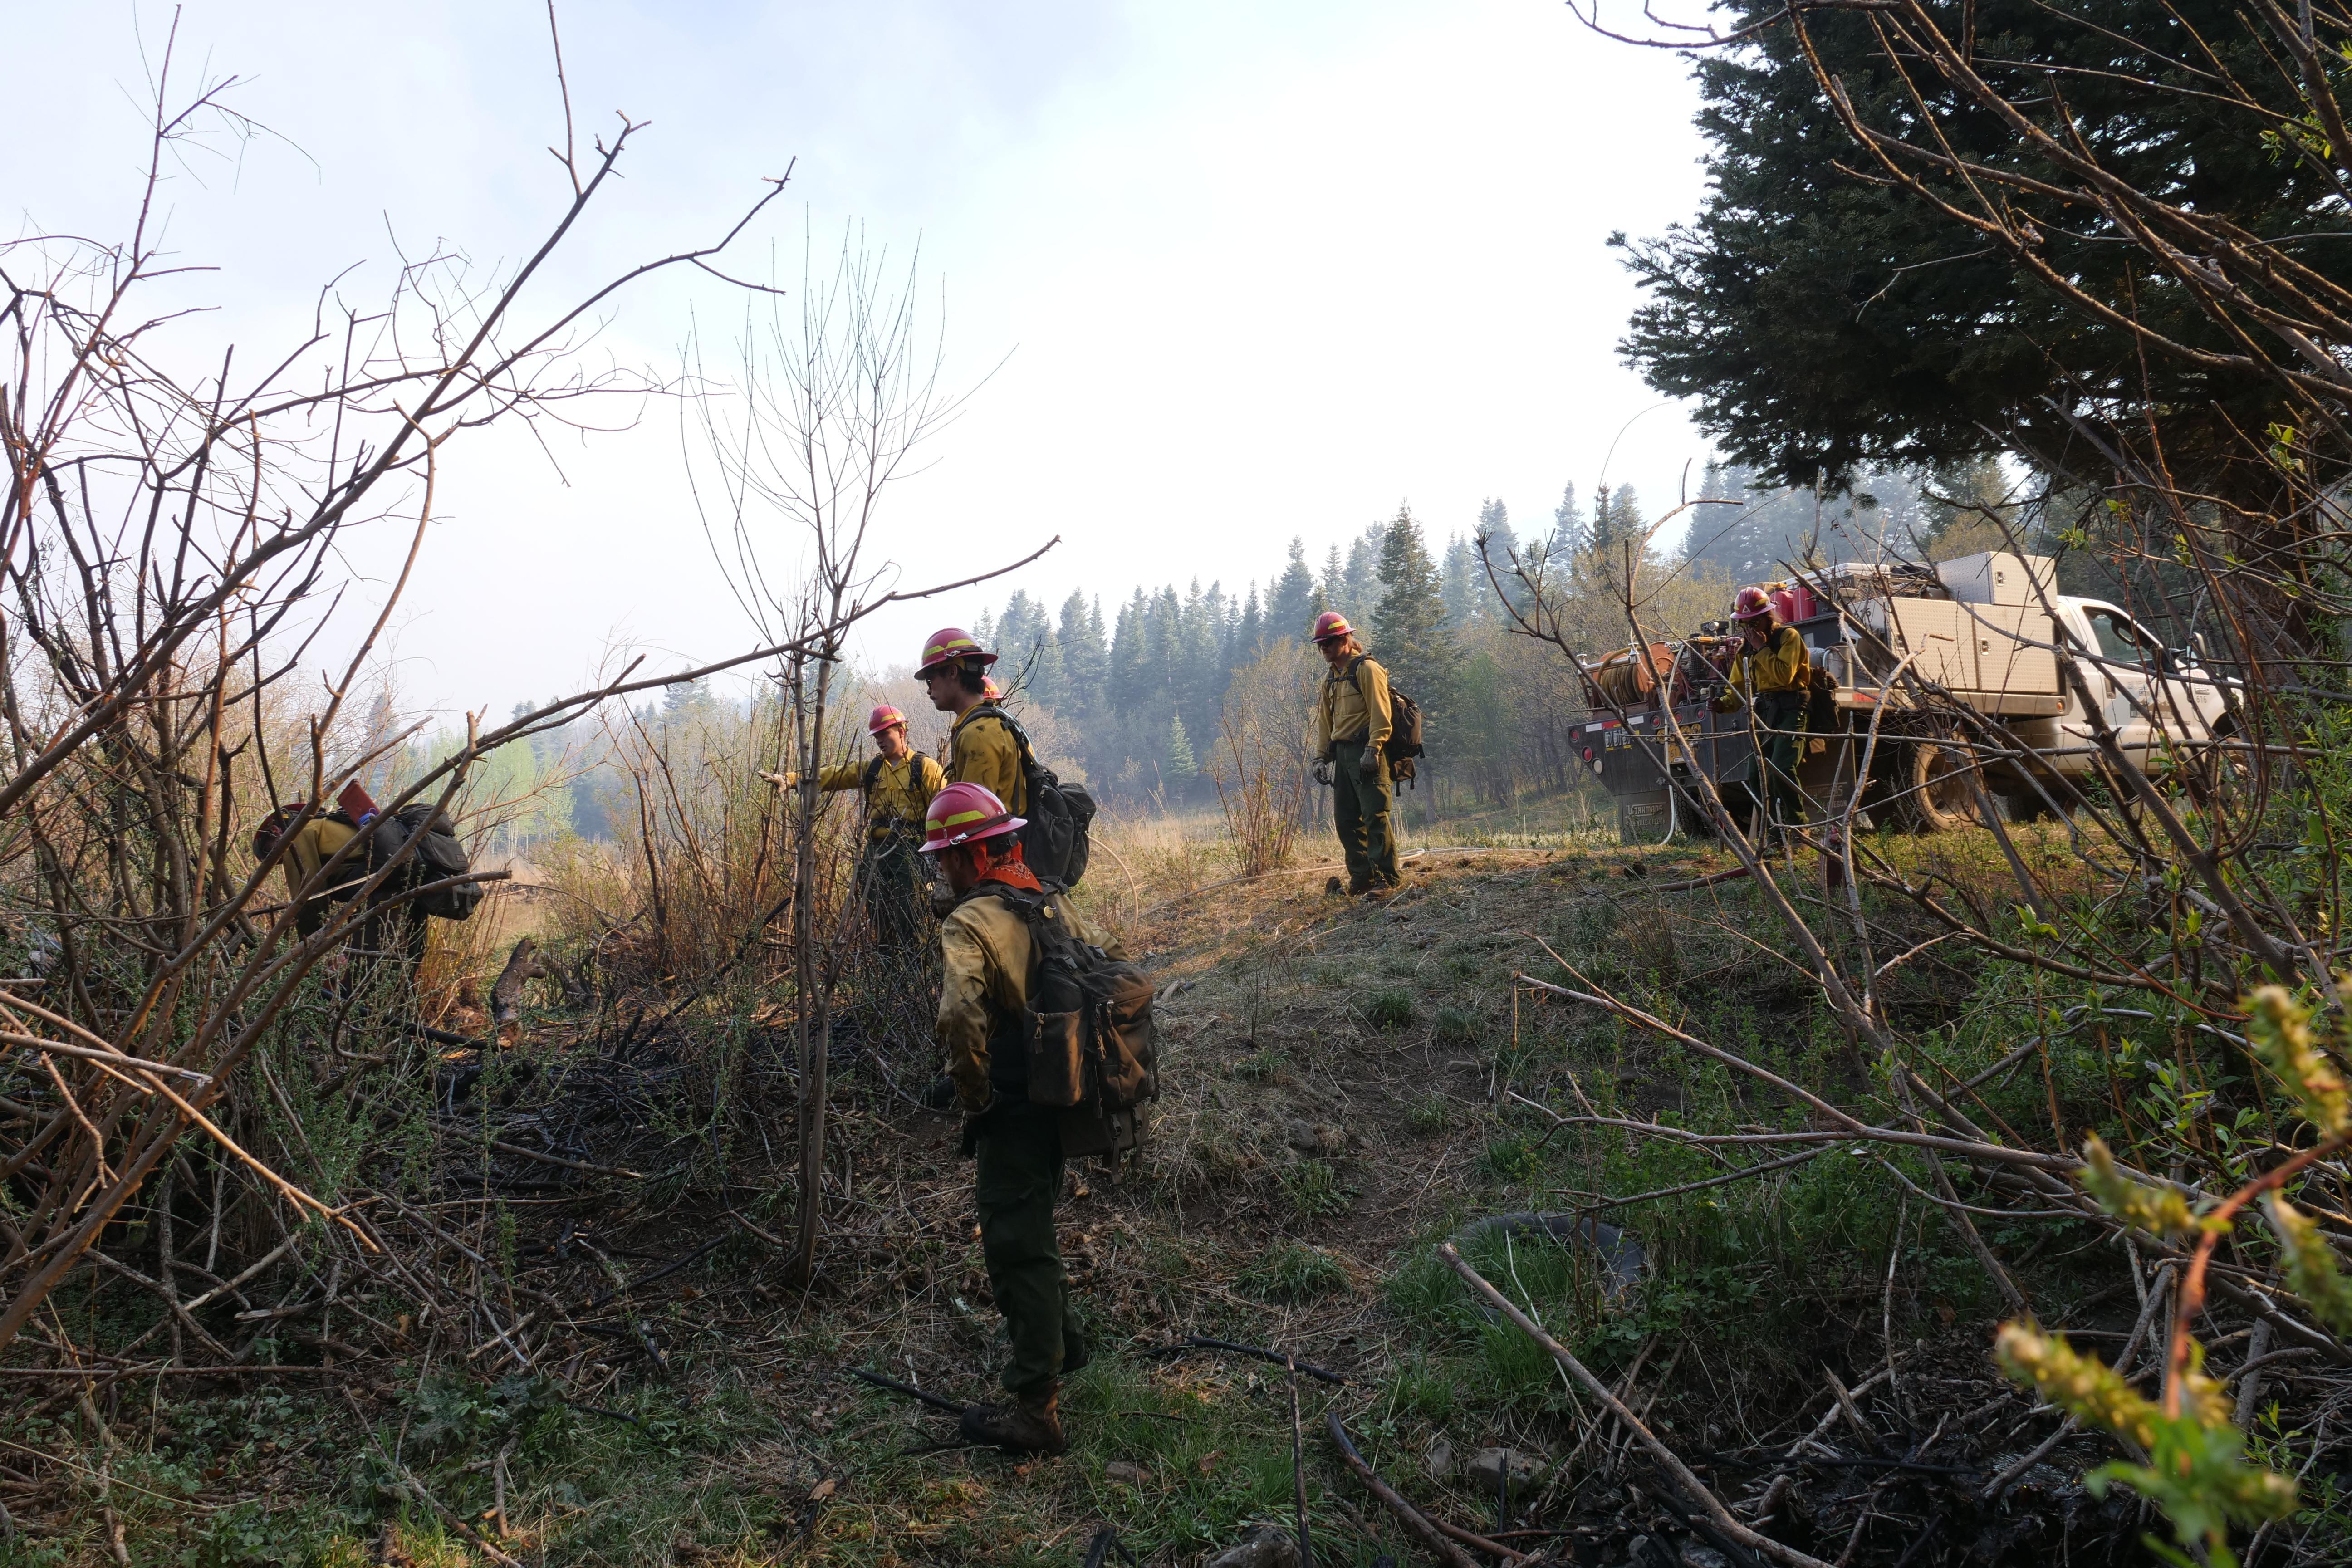 A team o firefighters work to clear think brush.